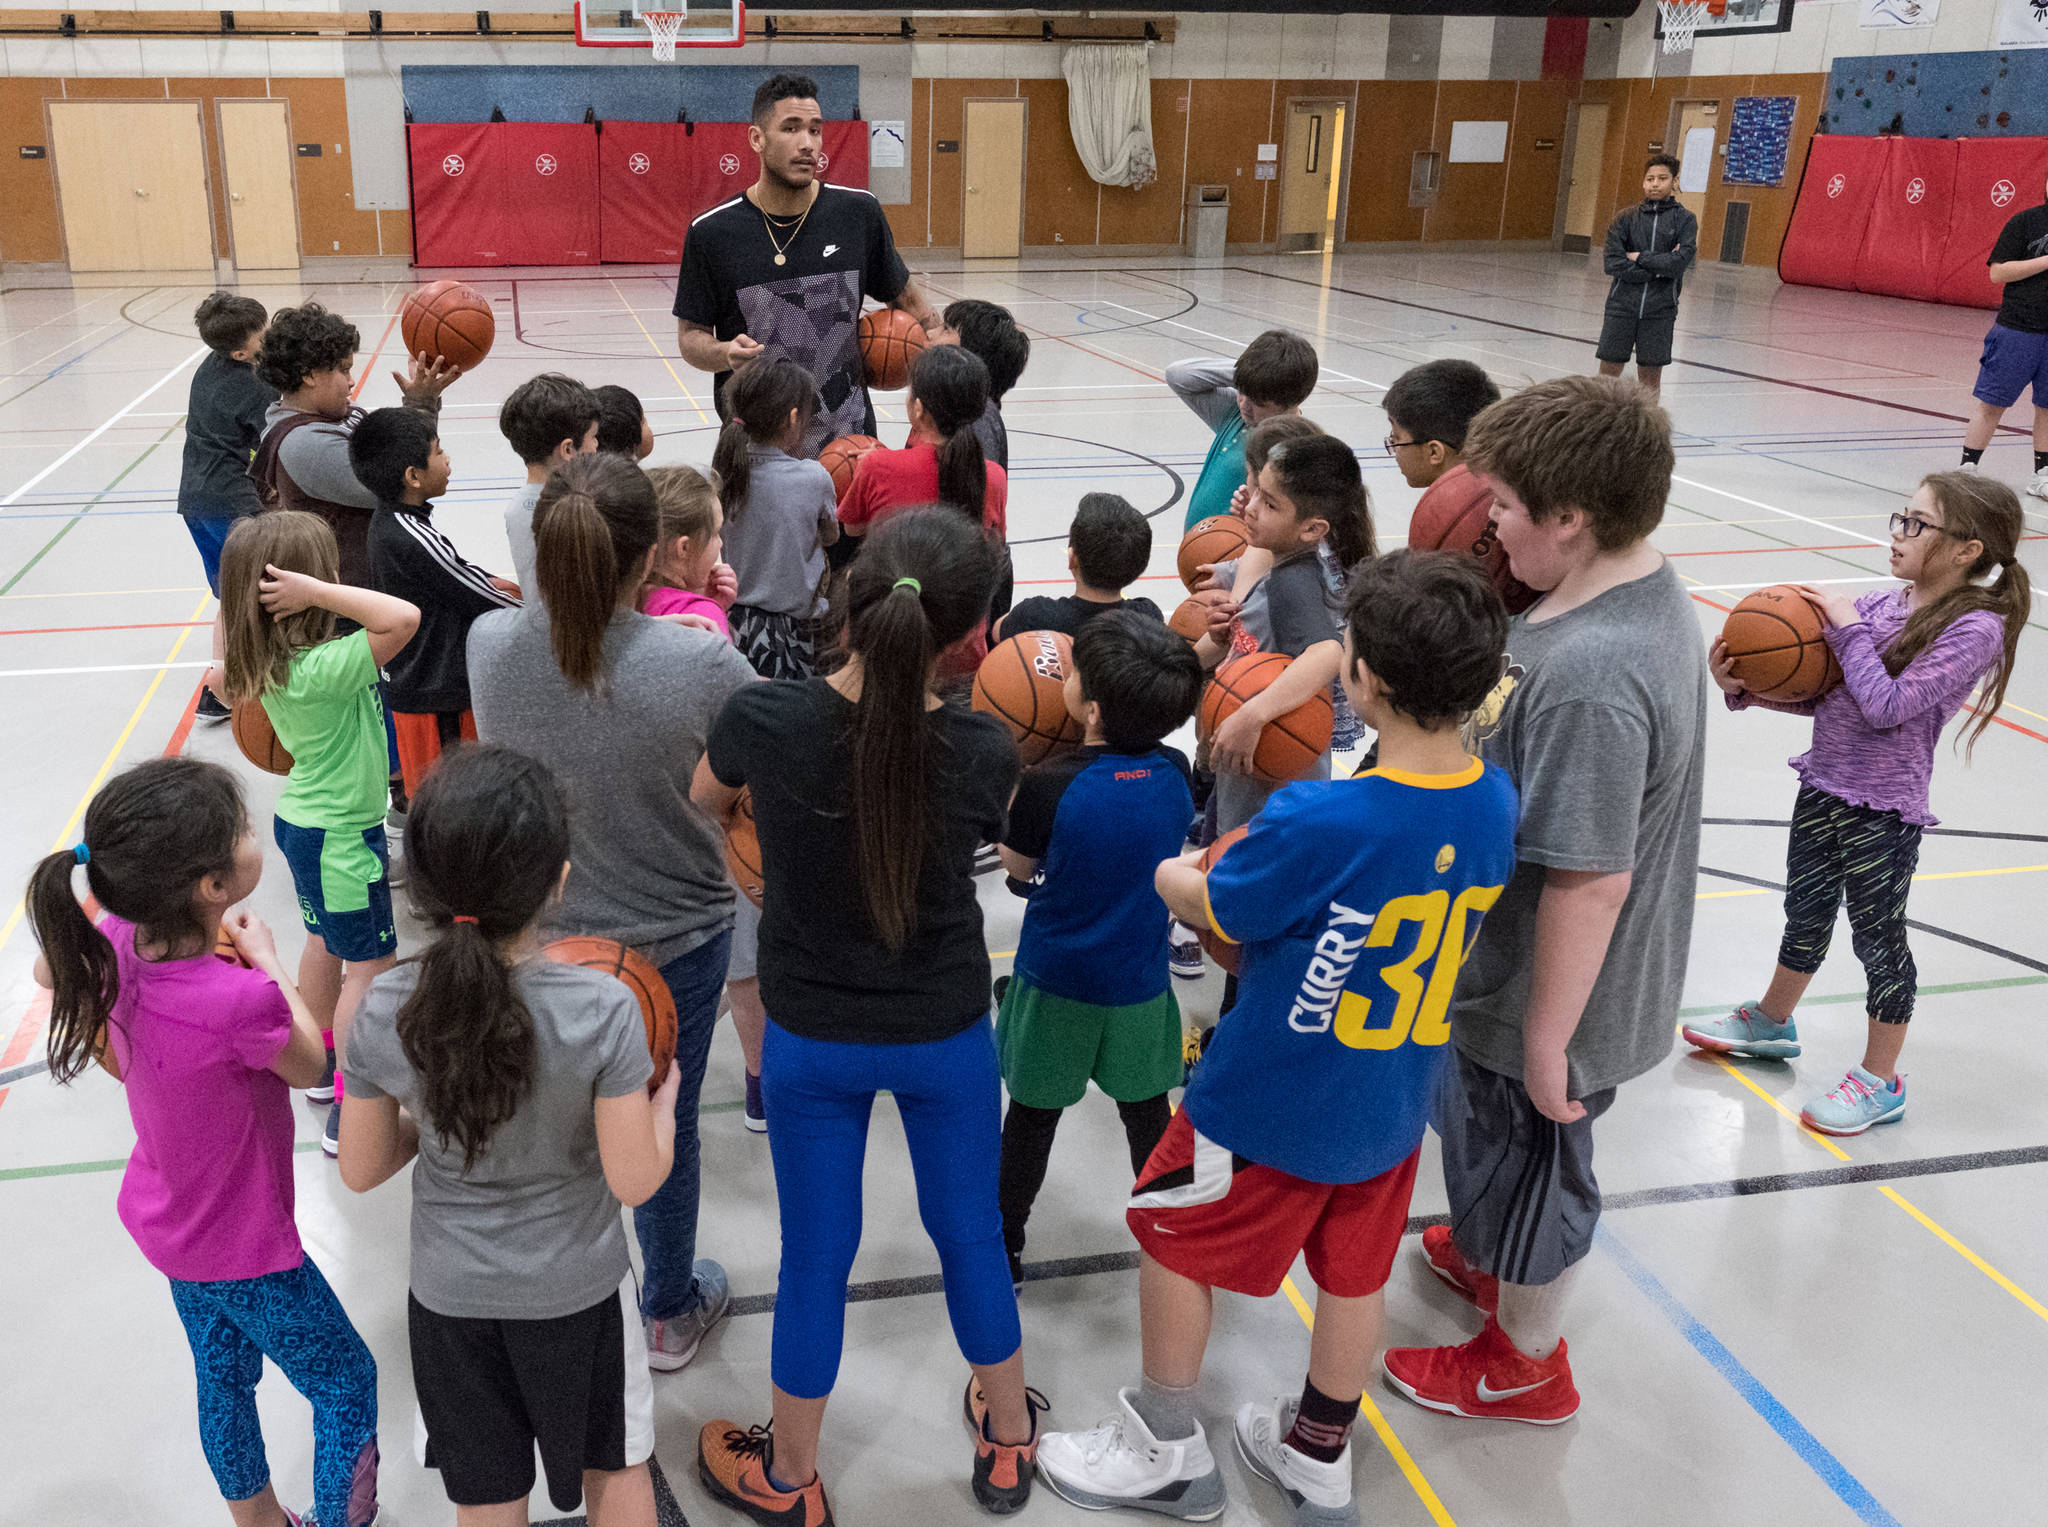 Damen Bell-Holter shares words during his basketball camp at Floyd Dryden Middle School last March. The camp was a partnership with Sealaska and Central Council of Tlingit & Haida Indian Tribes of Alaska. Bell-Holter is hosting a basketball and leadership camp “We Belong Here” beginning on Monday at Thunder Mountain High School. (Konrad Frank | Juneau Empire File)